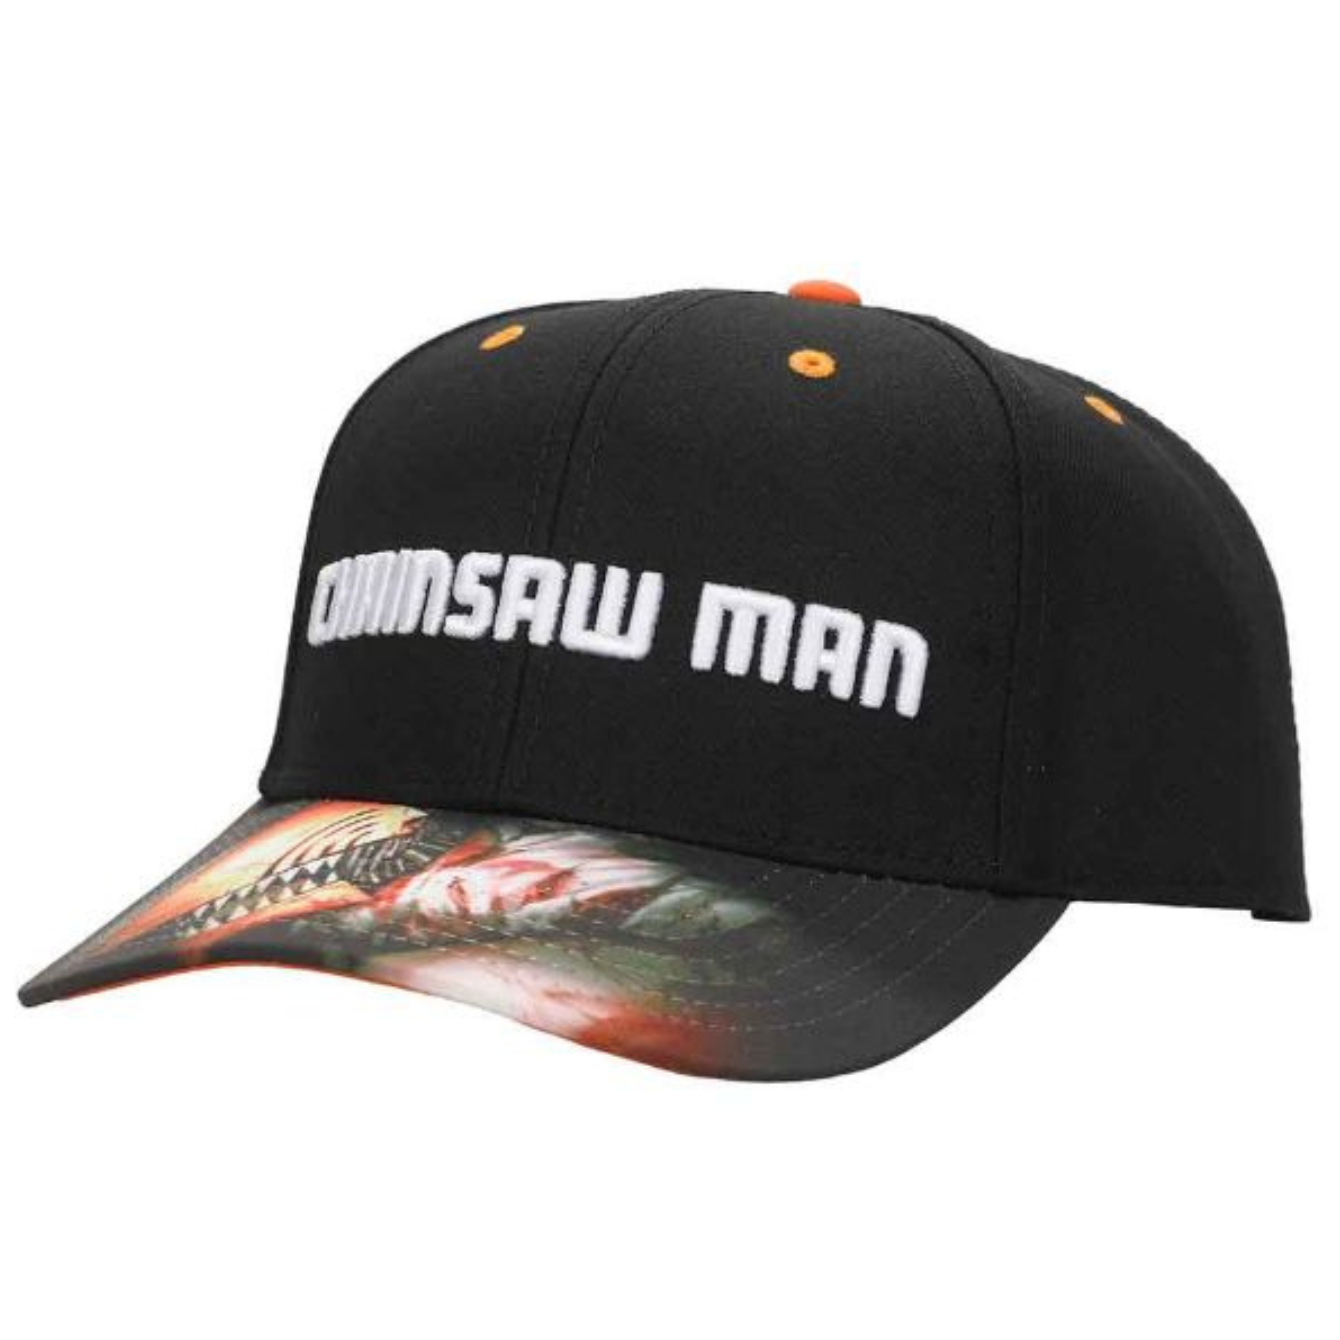 CHAINSAW MAN RAISED LOGO EMBROIDERED PRE-CURVED BILL SNAPBACK